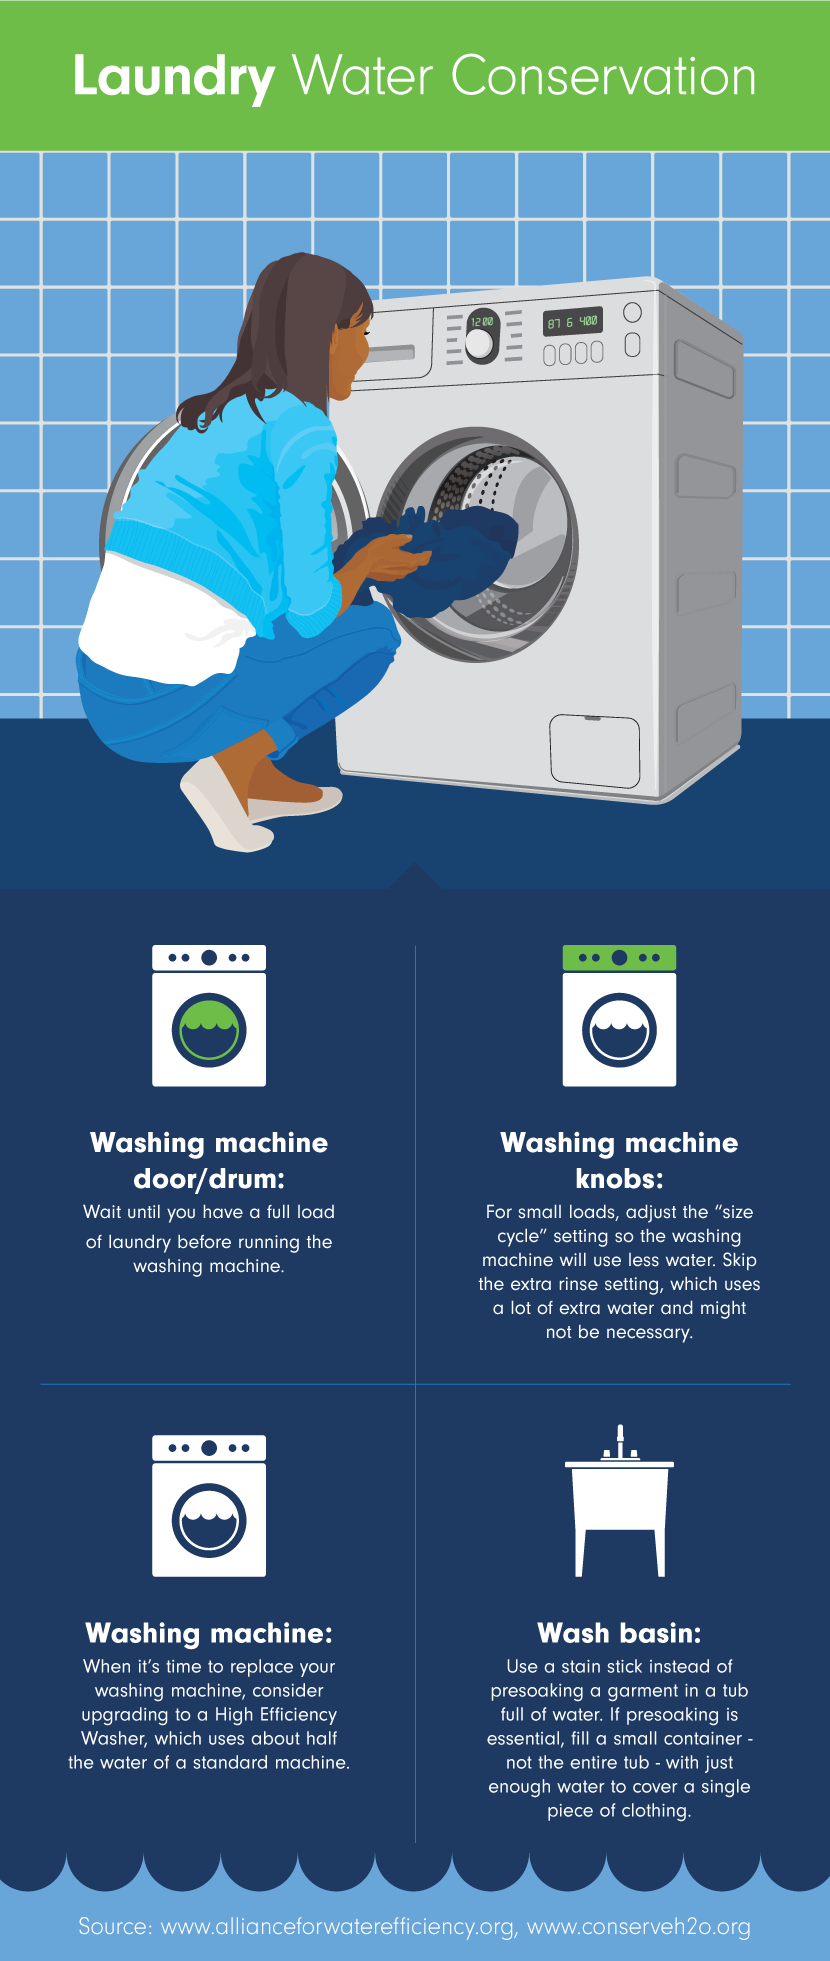 Laundry Water Conservation - Reduce Water Waste: Simple Solutions for Using Less